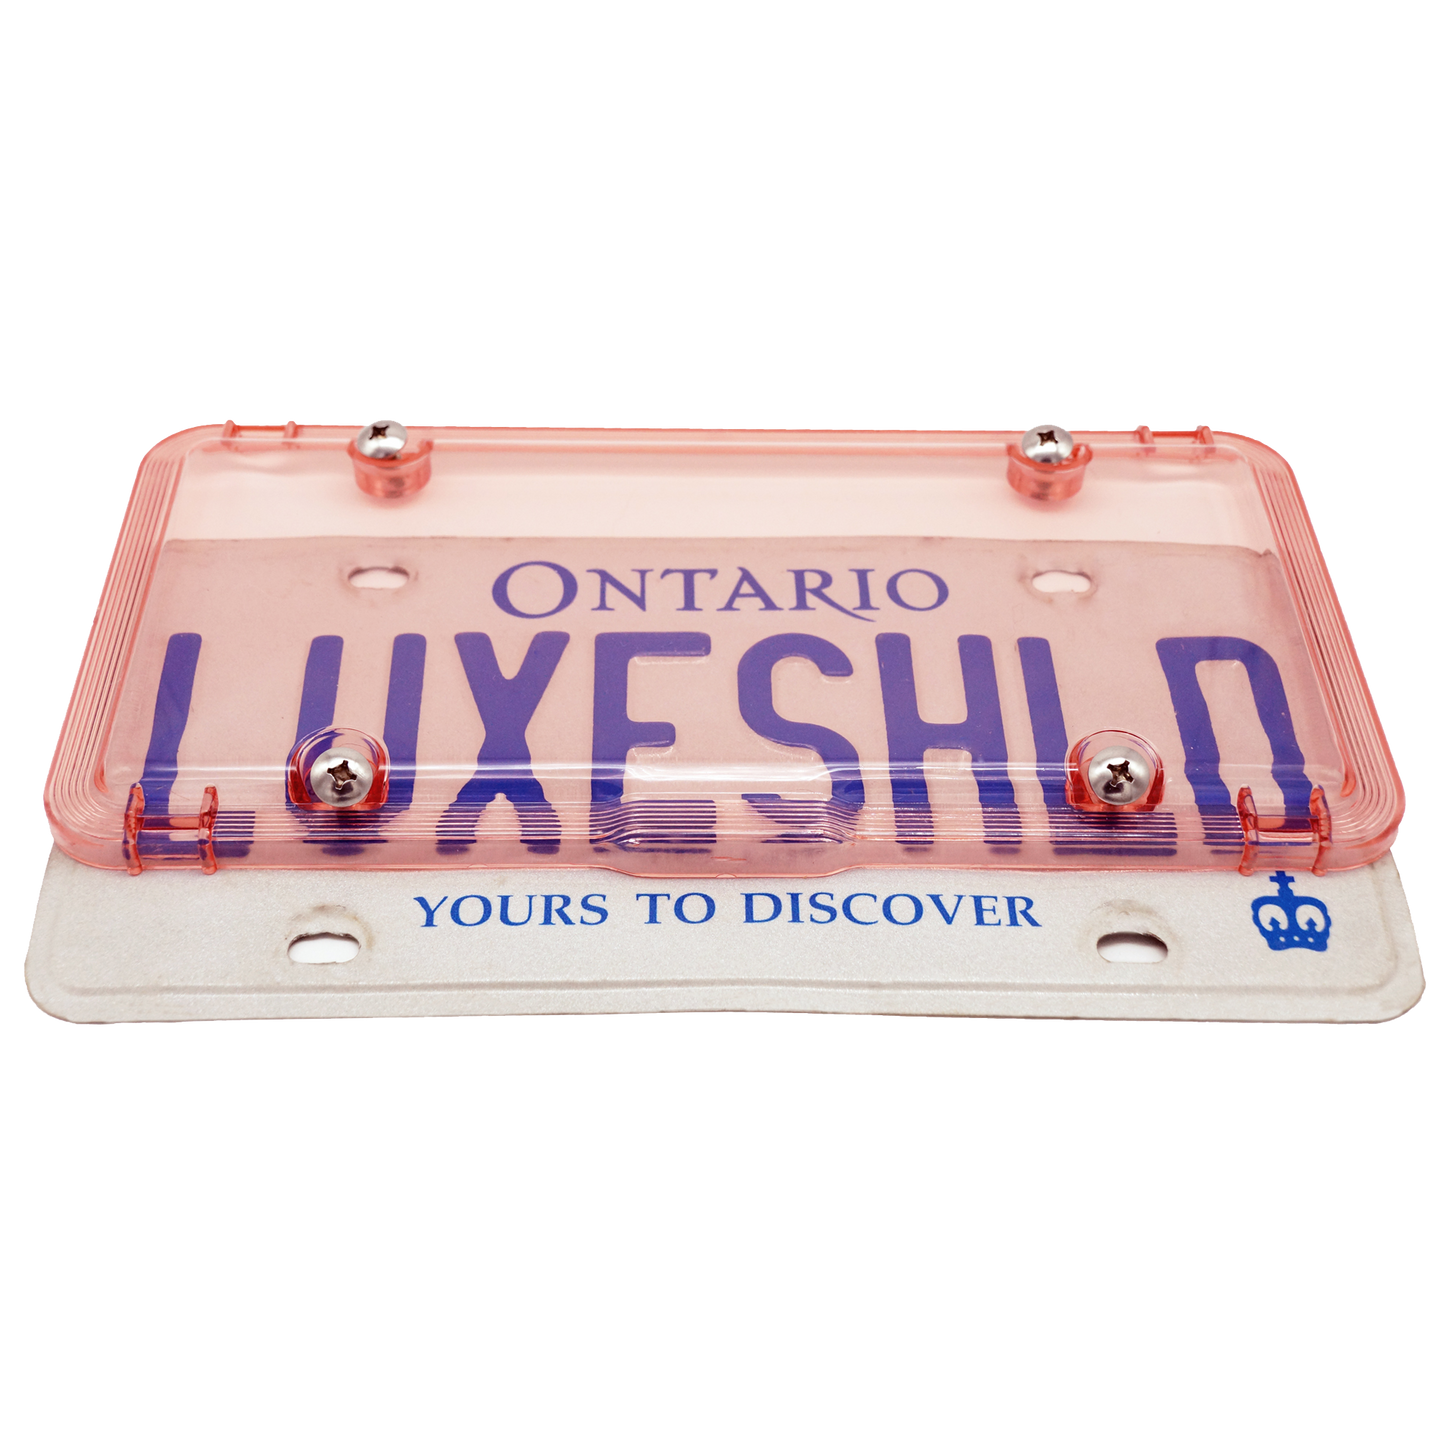 Luxe Shield, Premium Pink License Plate Cover includes Stainless Screw